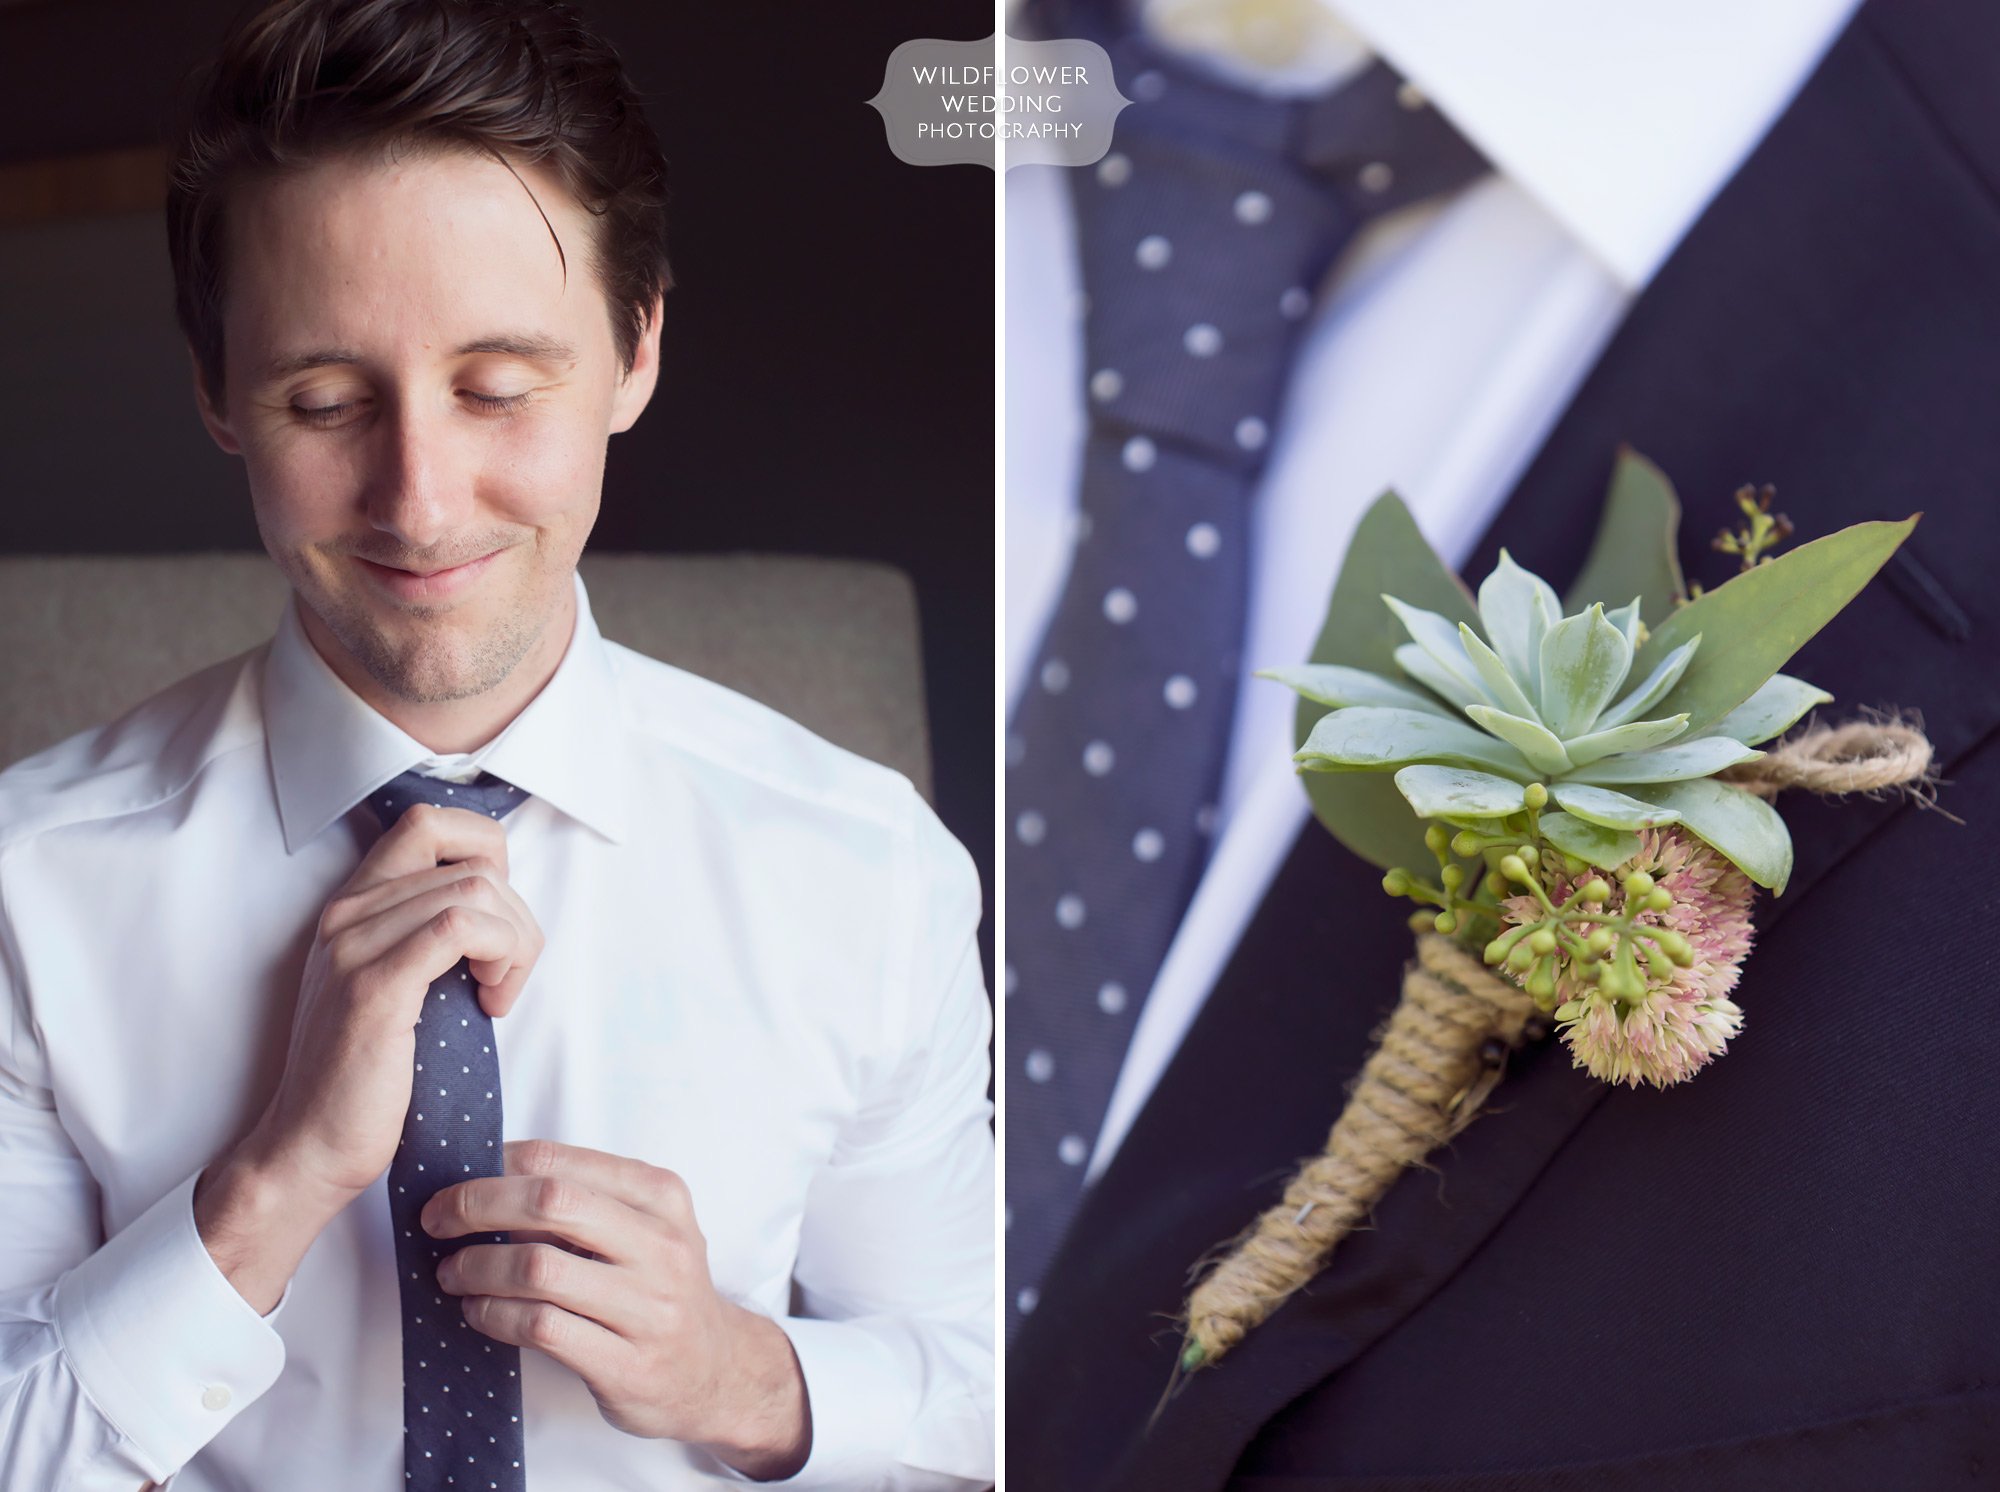 Artsy wedding photography of the groom getting ready with a succulent boutonniere and polka dot tie in Columbia, MO.